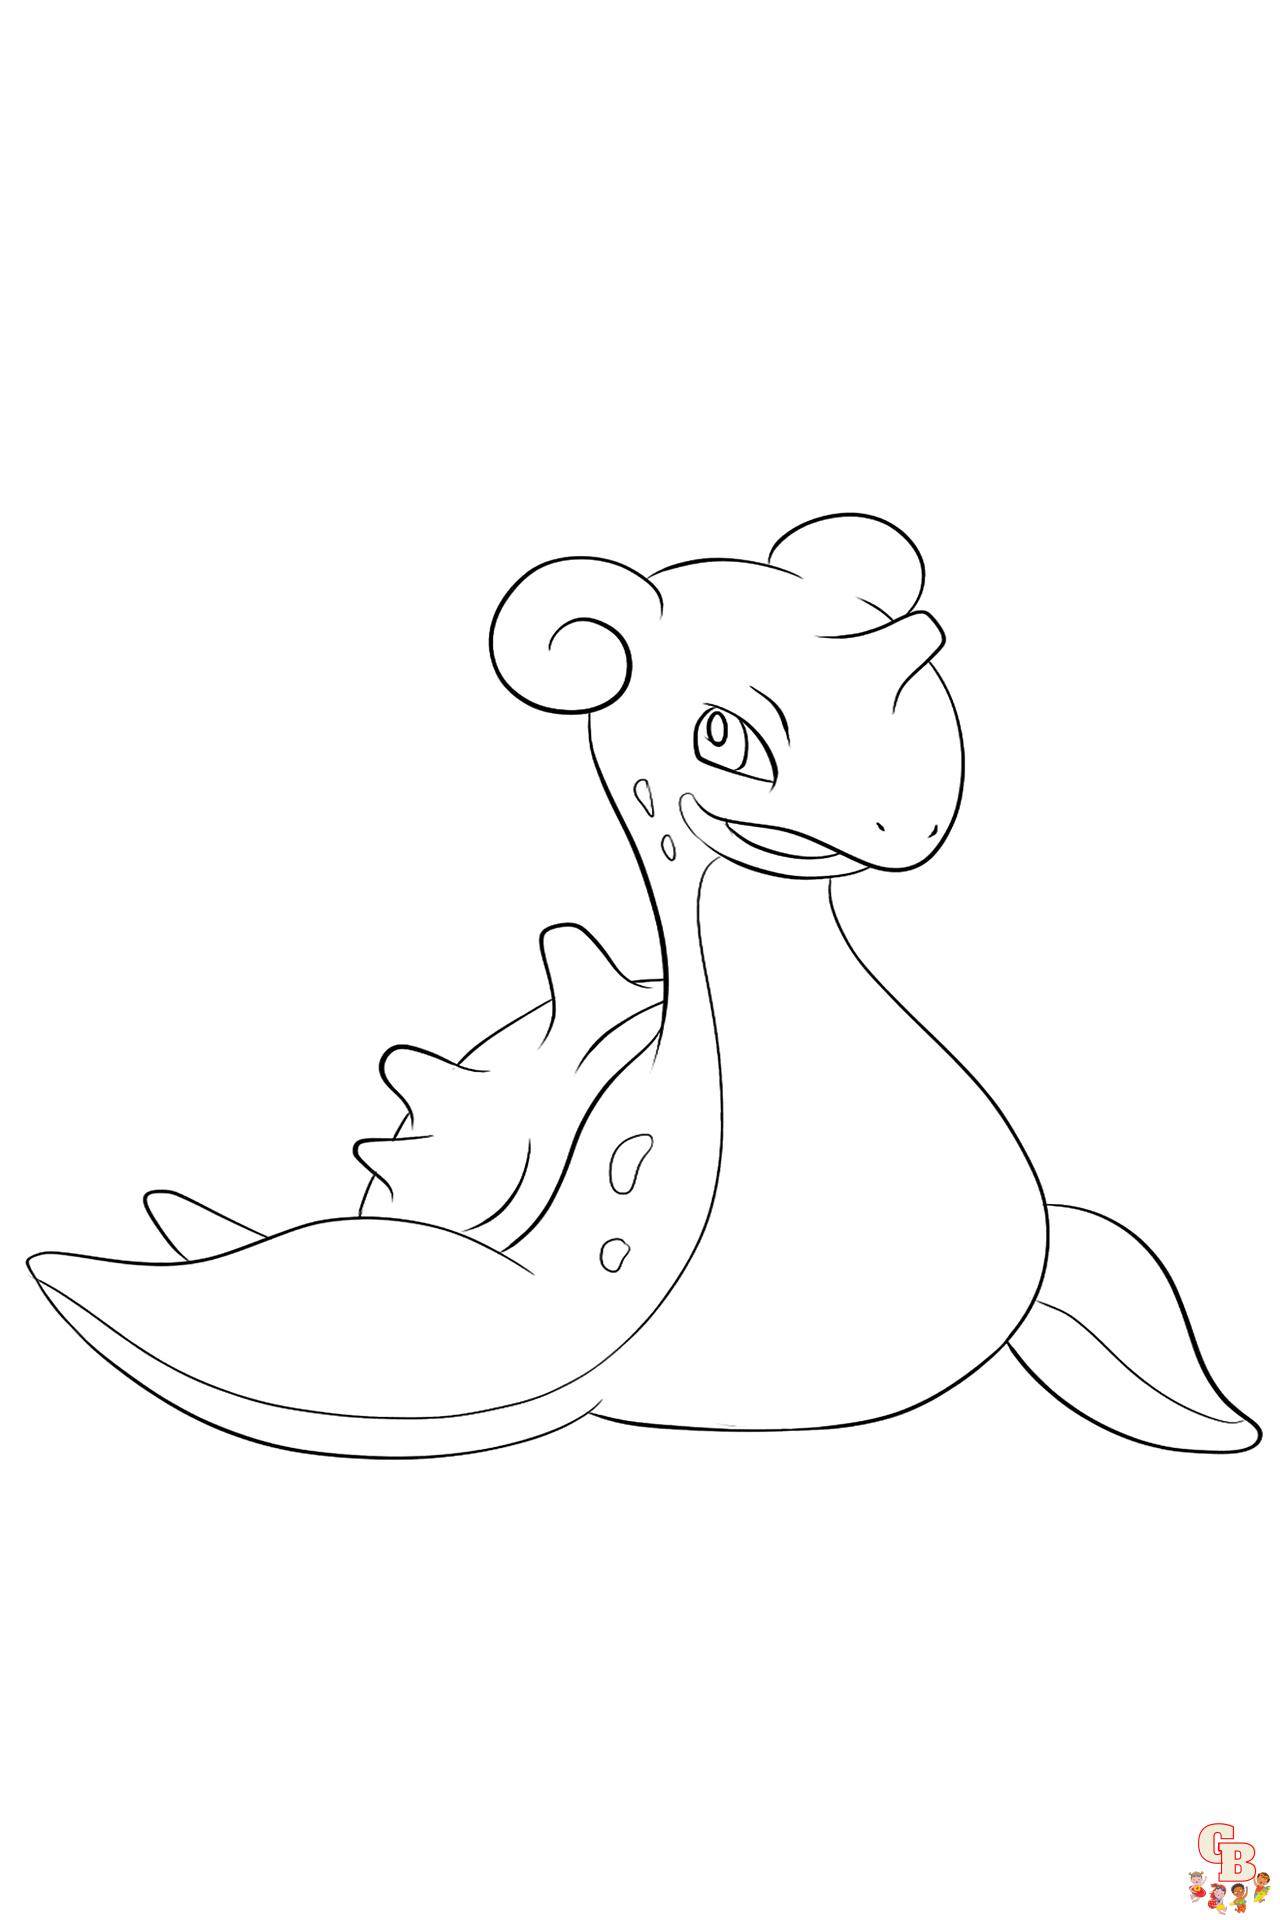 Cute Pokemon coloring pages 16 1